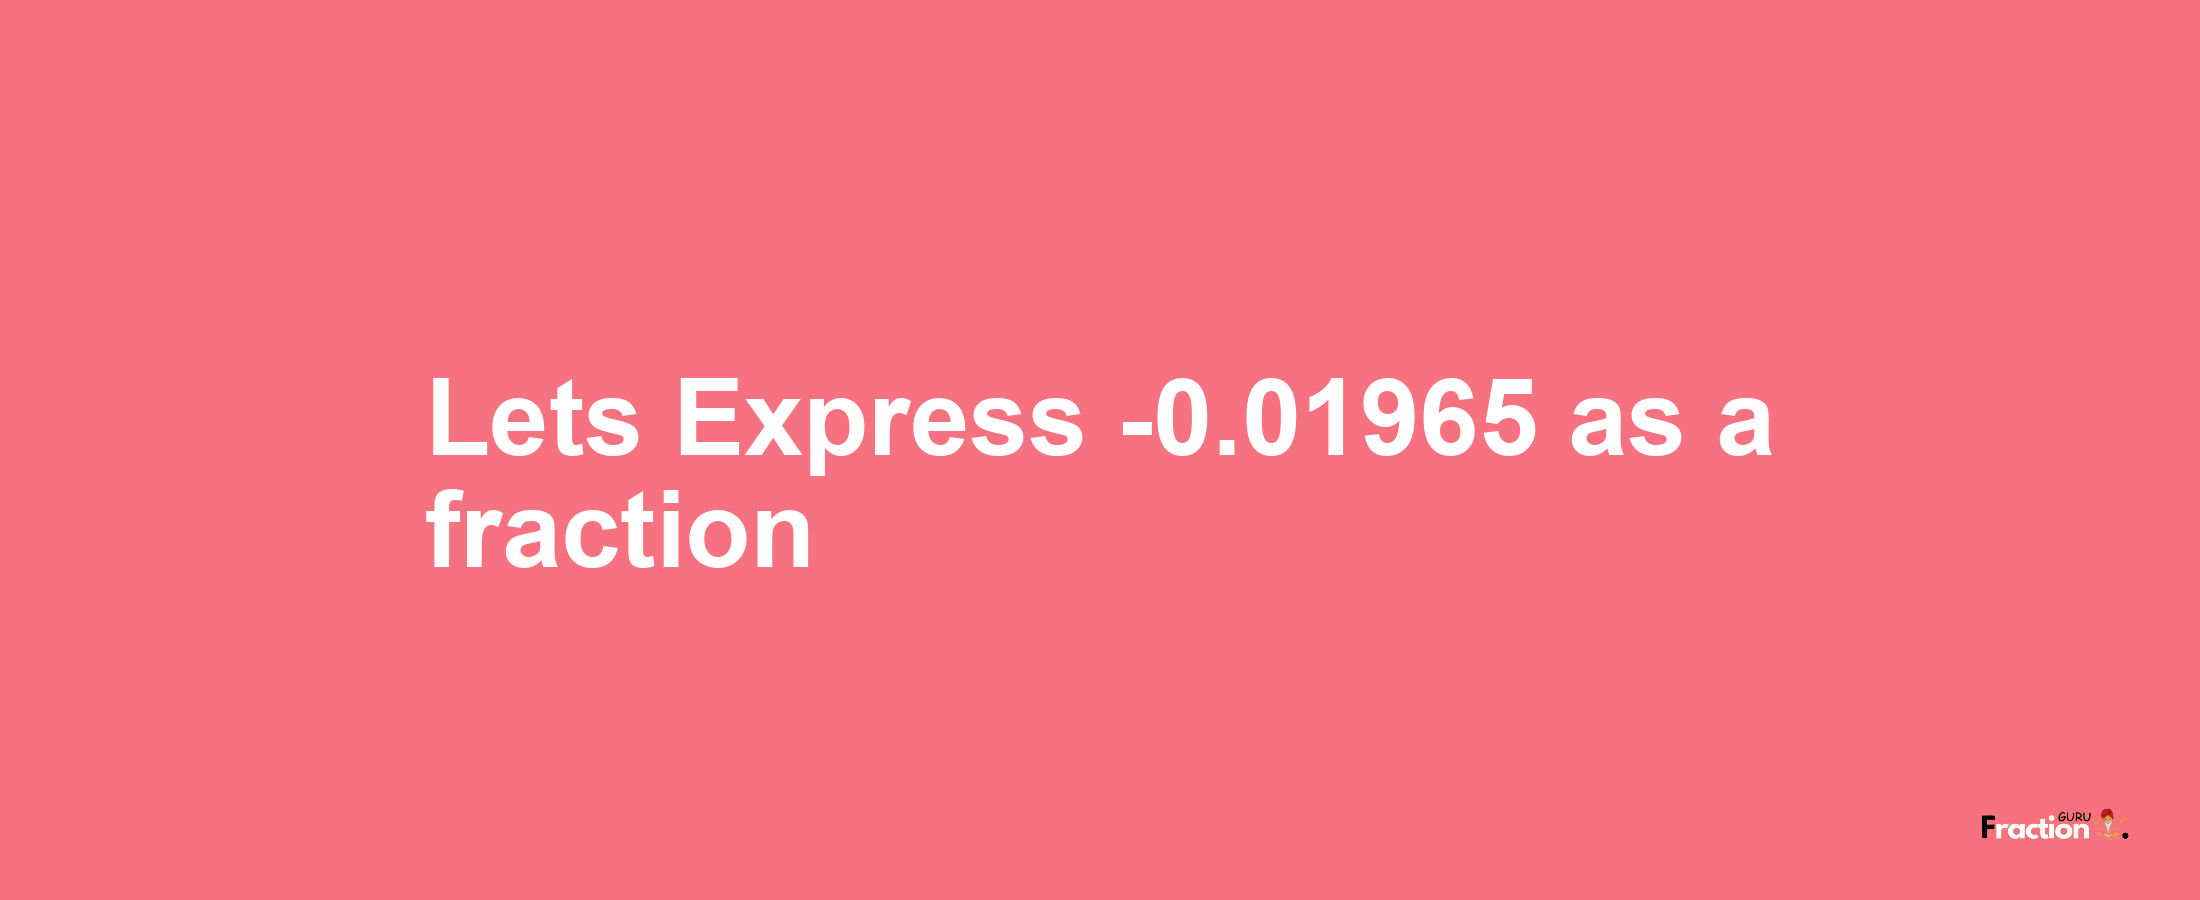 Lets Express -0.01965 as afraction